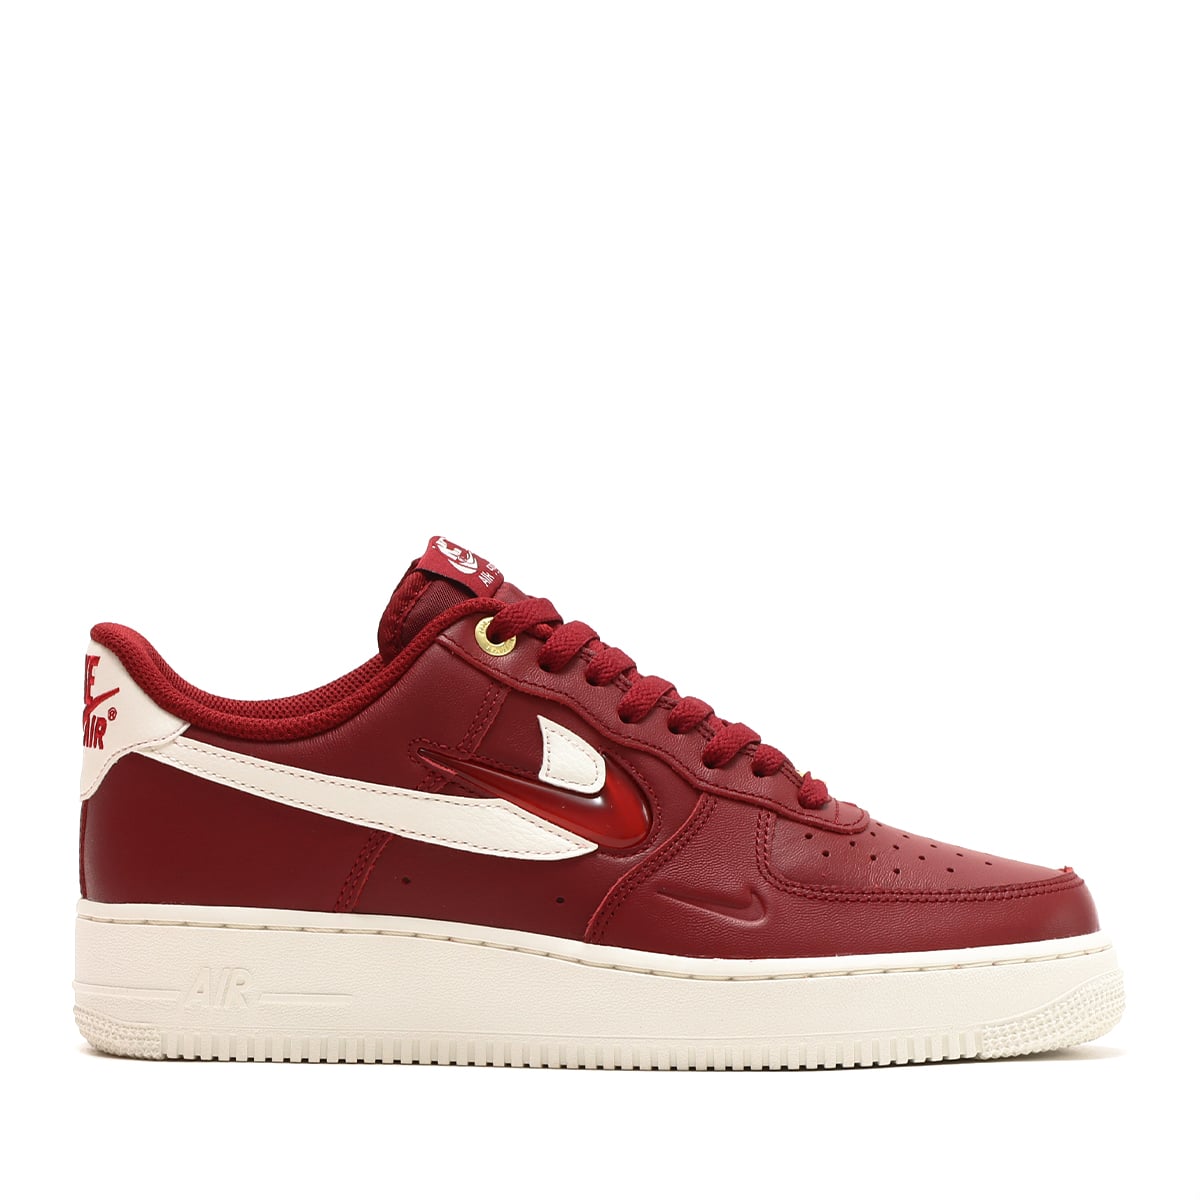 NIKE AIR FORCE 1 '07 PRM TEAM RED/SAIL-GYM RED-TEAM RED 22HO-I